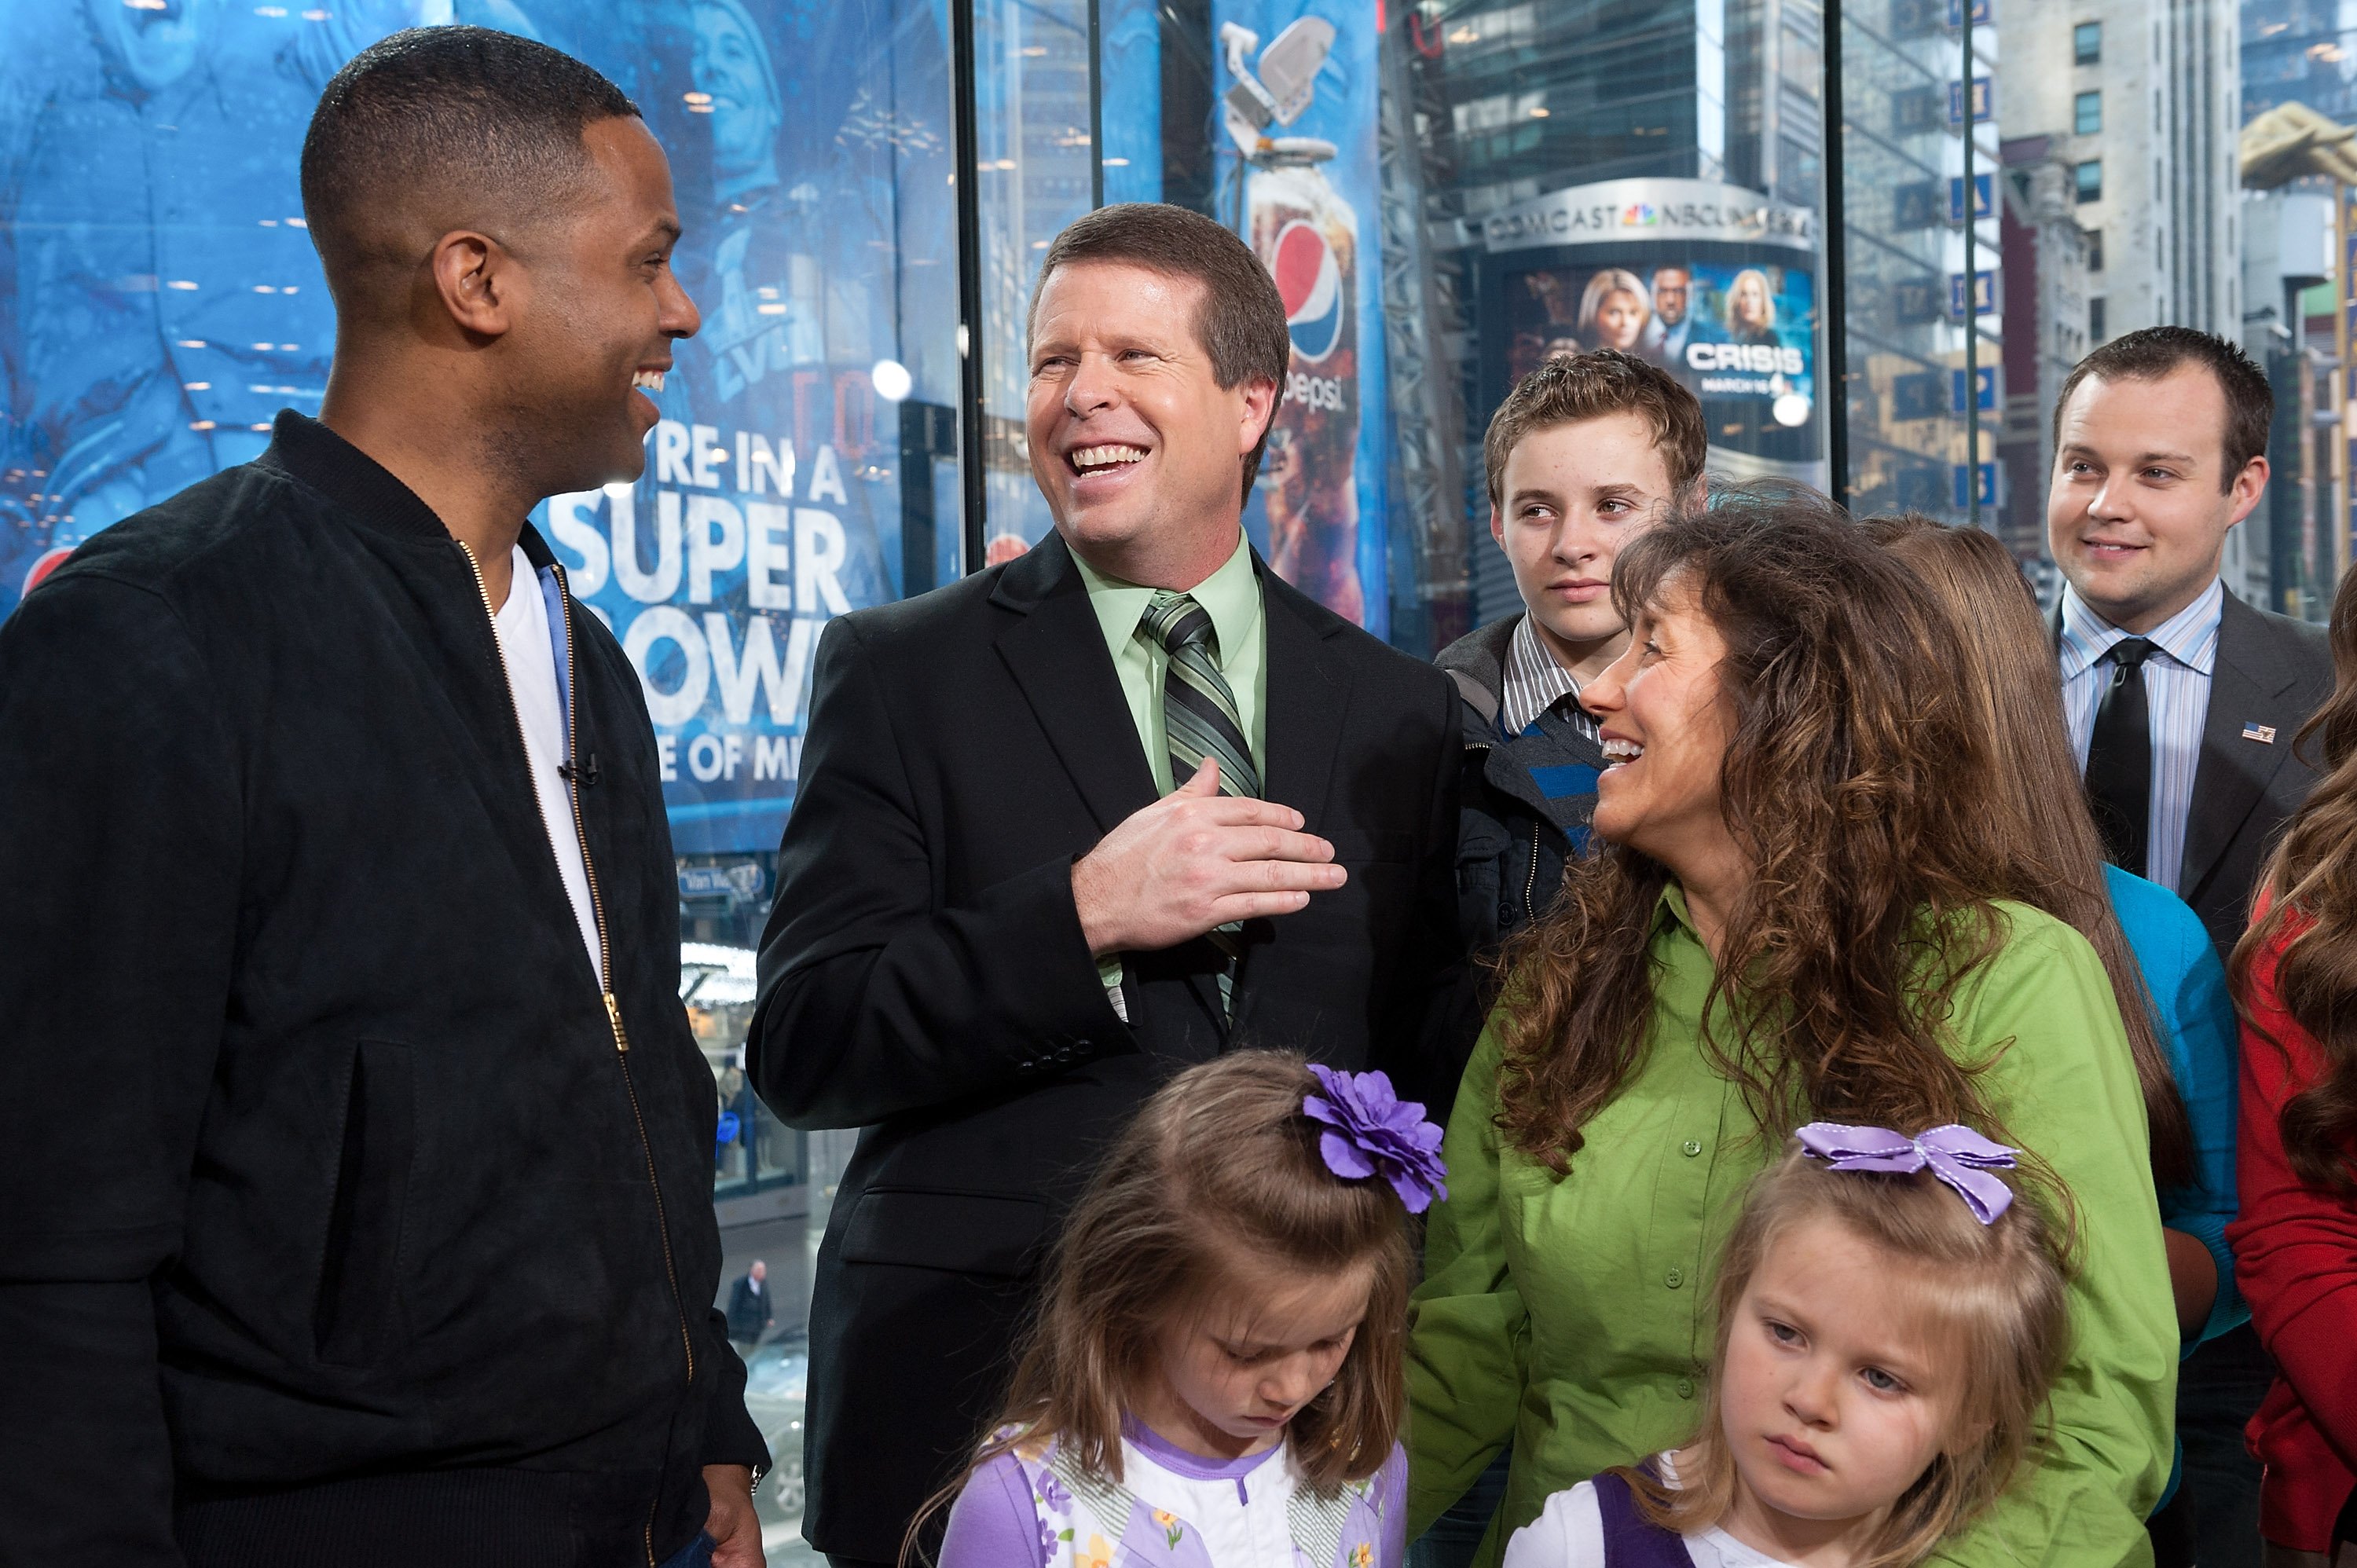 AJ Calloway interviews the Duggar family for 'Extra' in 2014